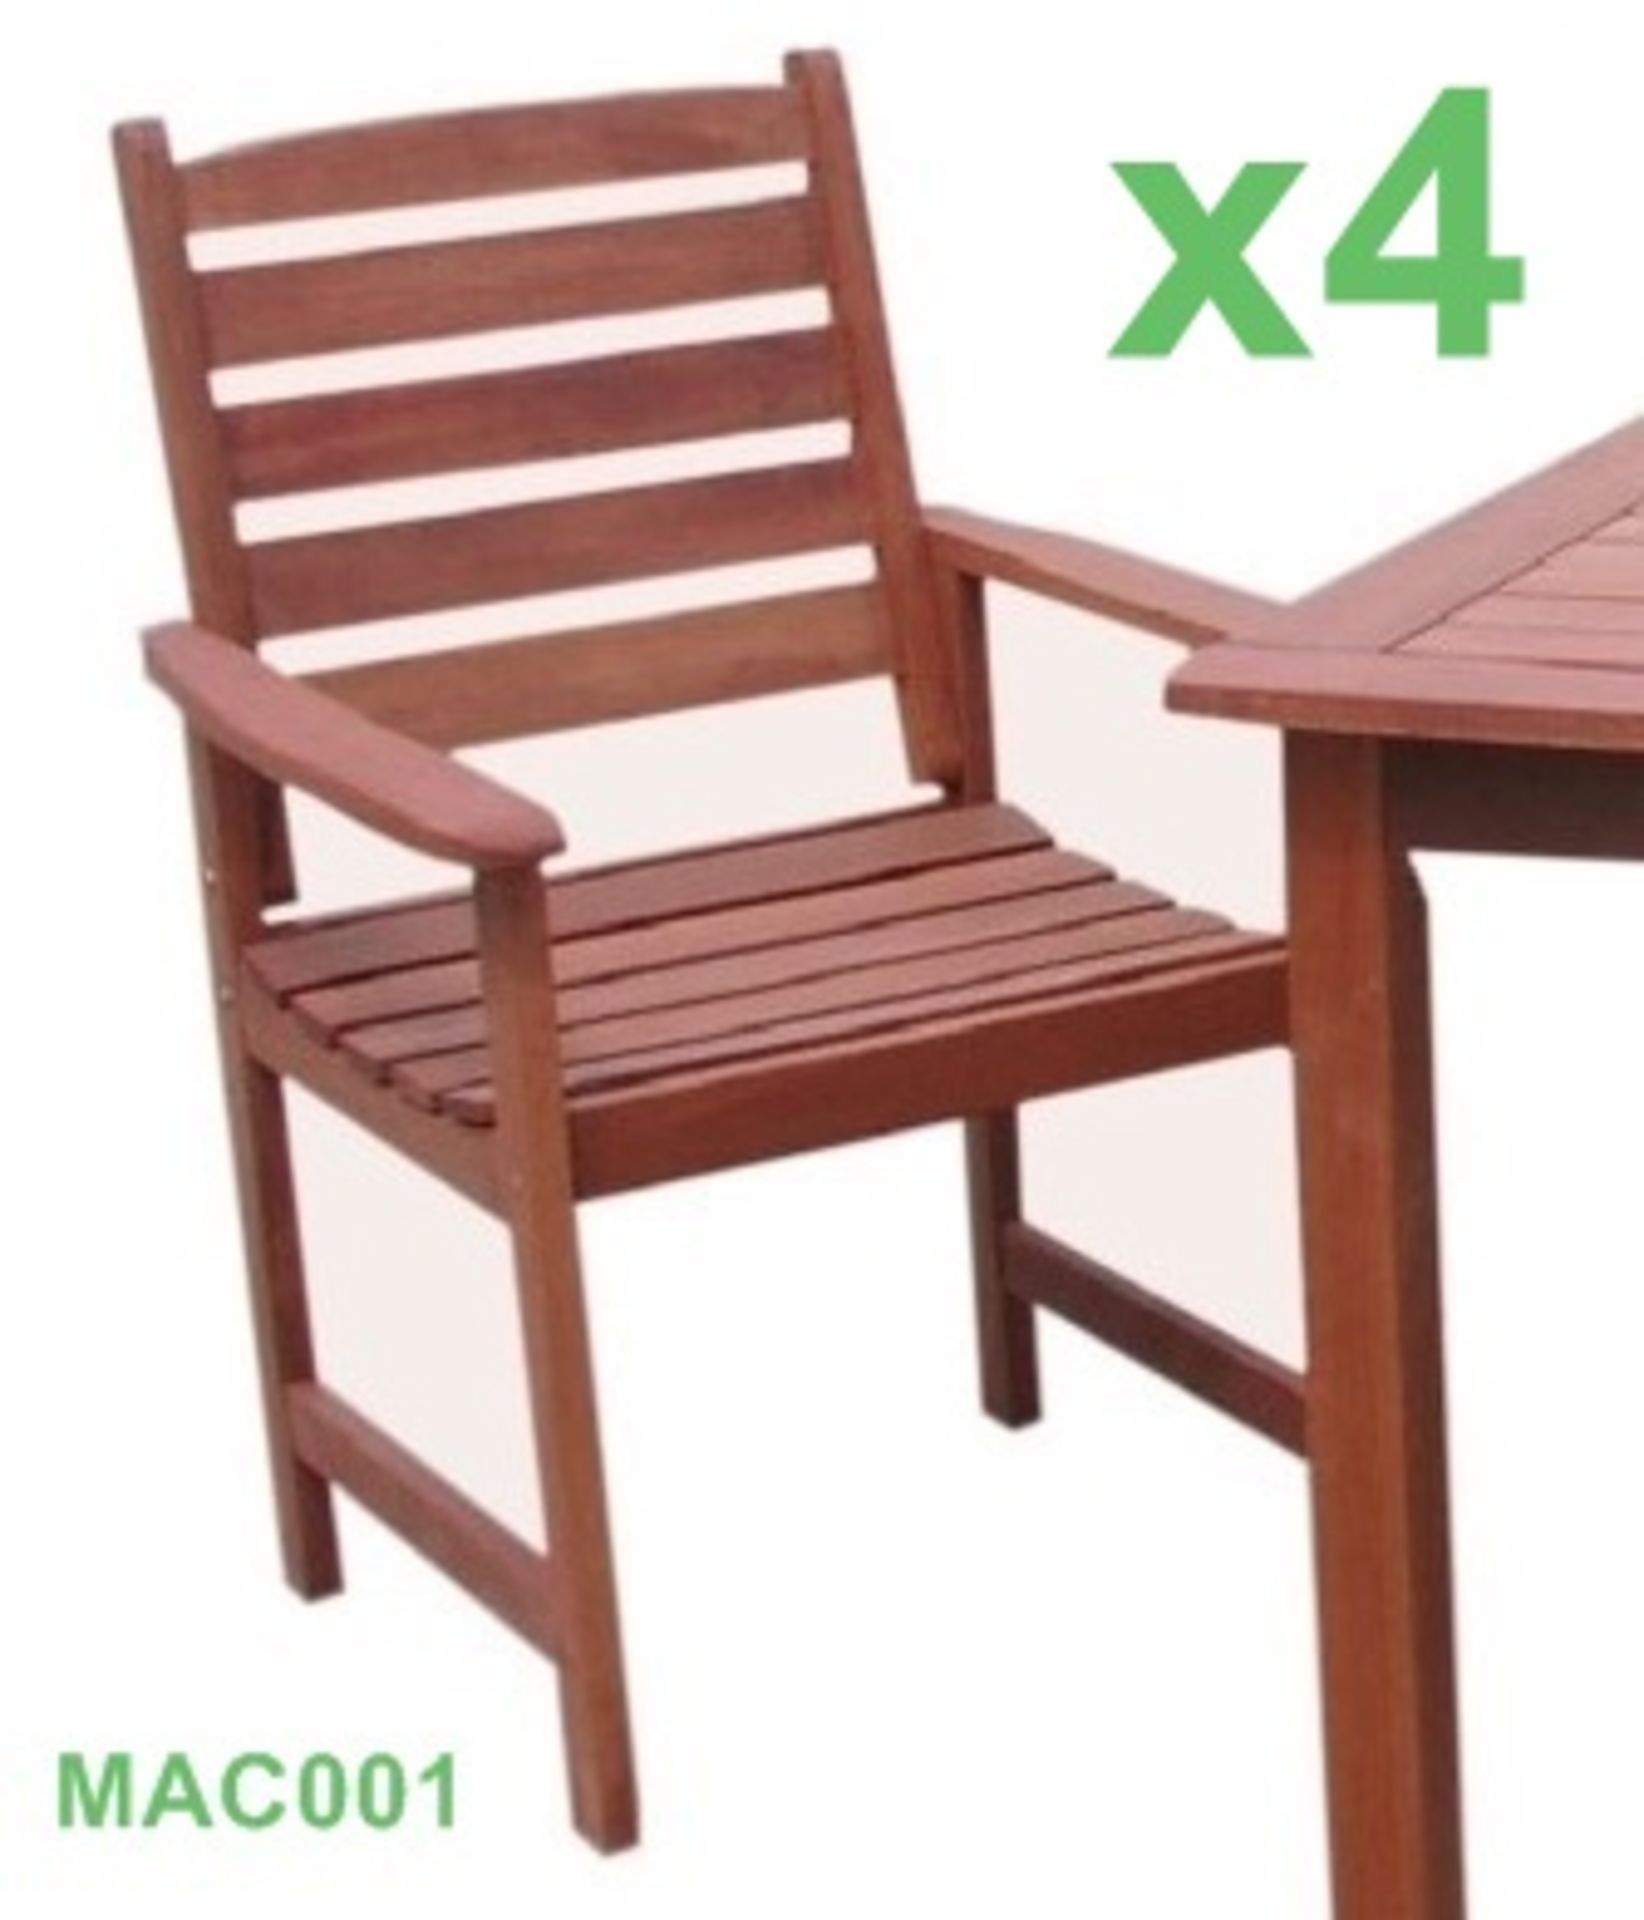 5-Piece Garden Furniture Set Includes 1 x Table Extending (Rectangular) & 4 x Armchairs - Made - Image 3 of 3